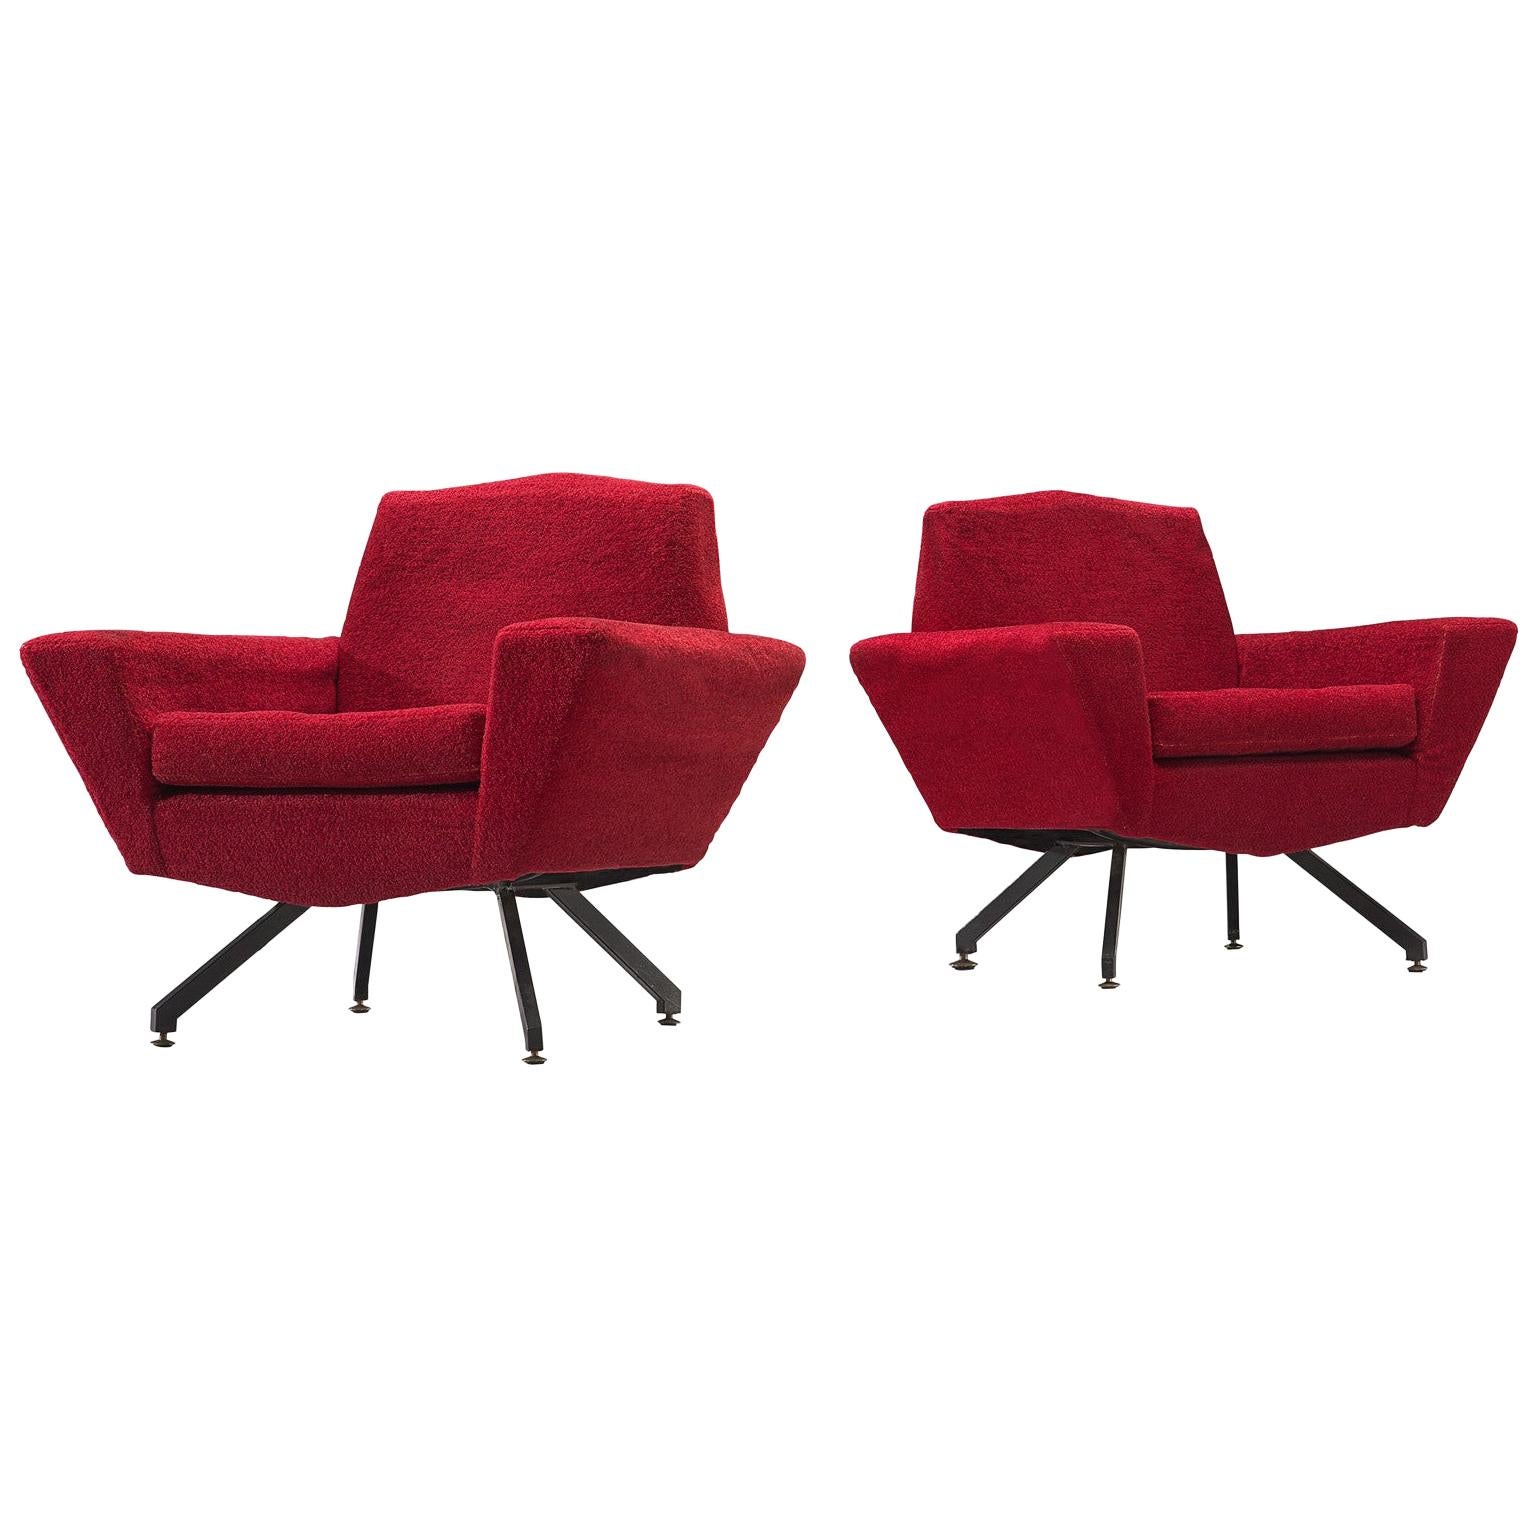 Studio APA for Lenzi Pair of Lounge Chairs in Red Upholstery